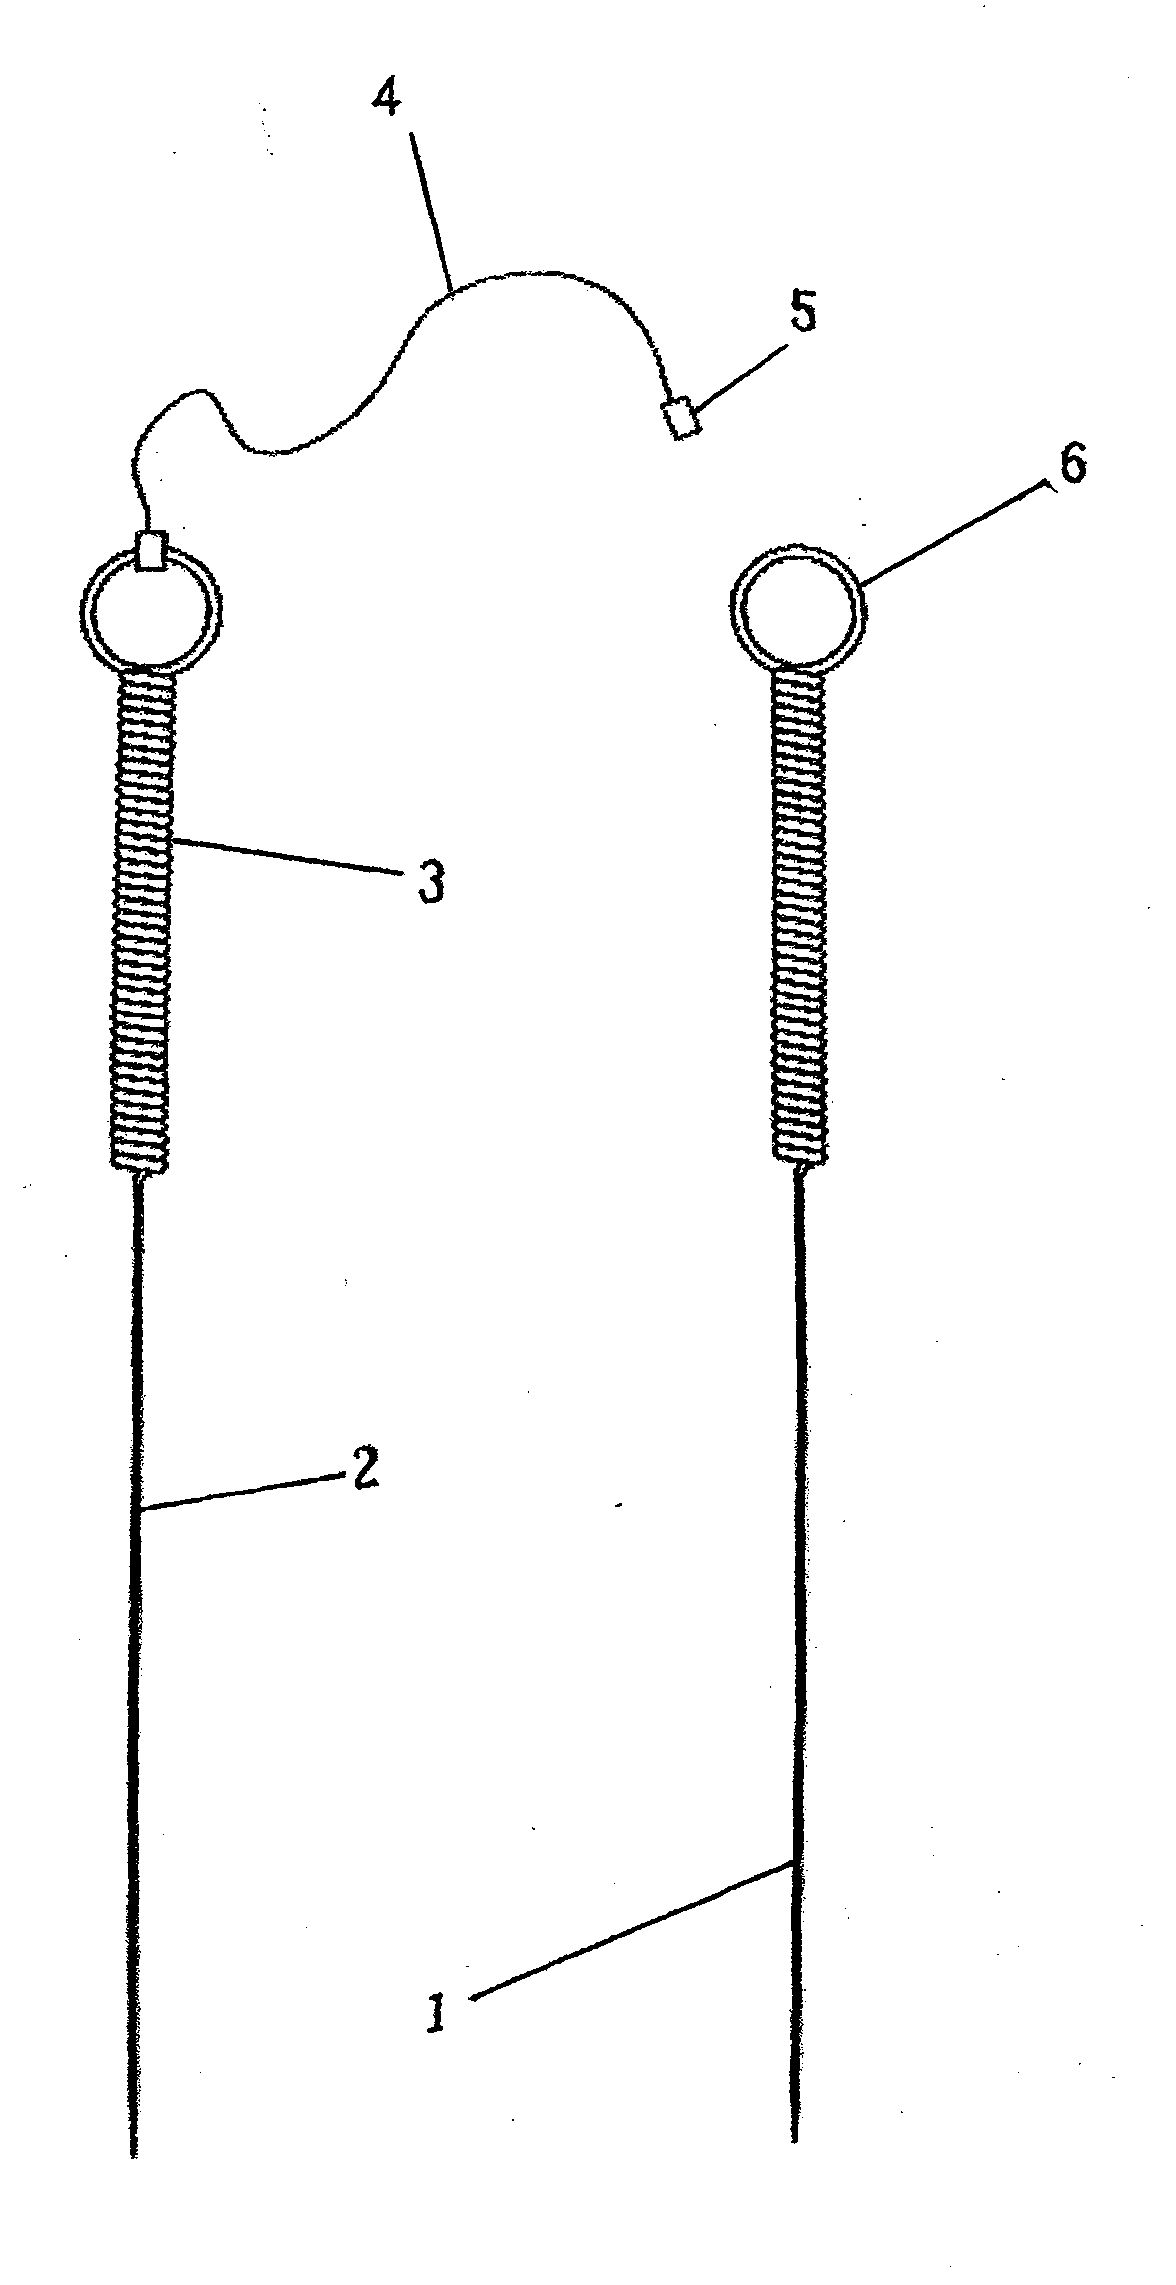 Acupuncture needle with electrolytic effect